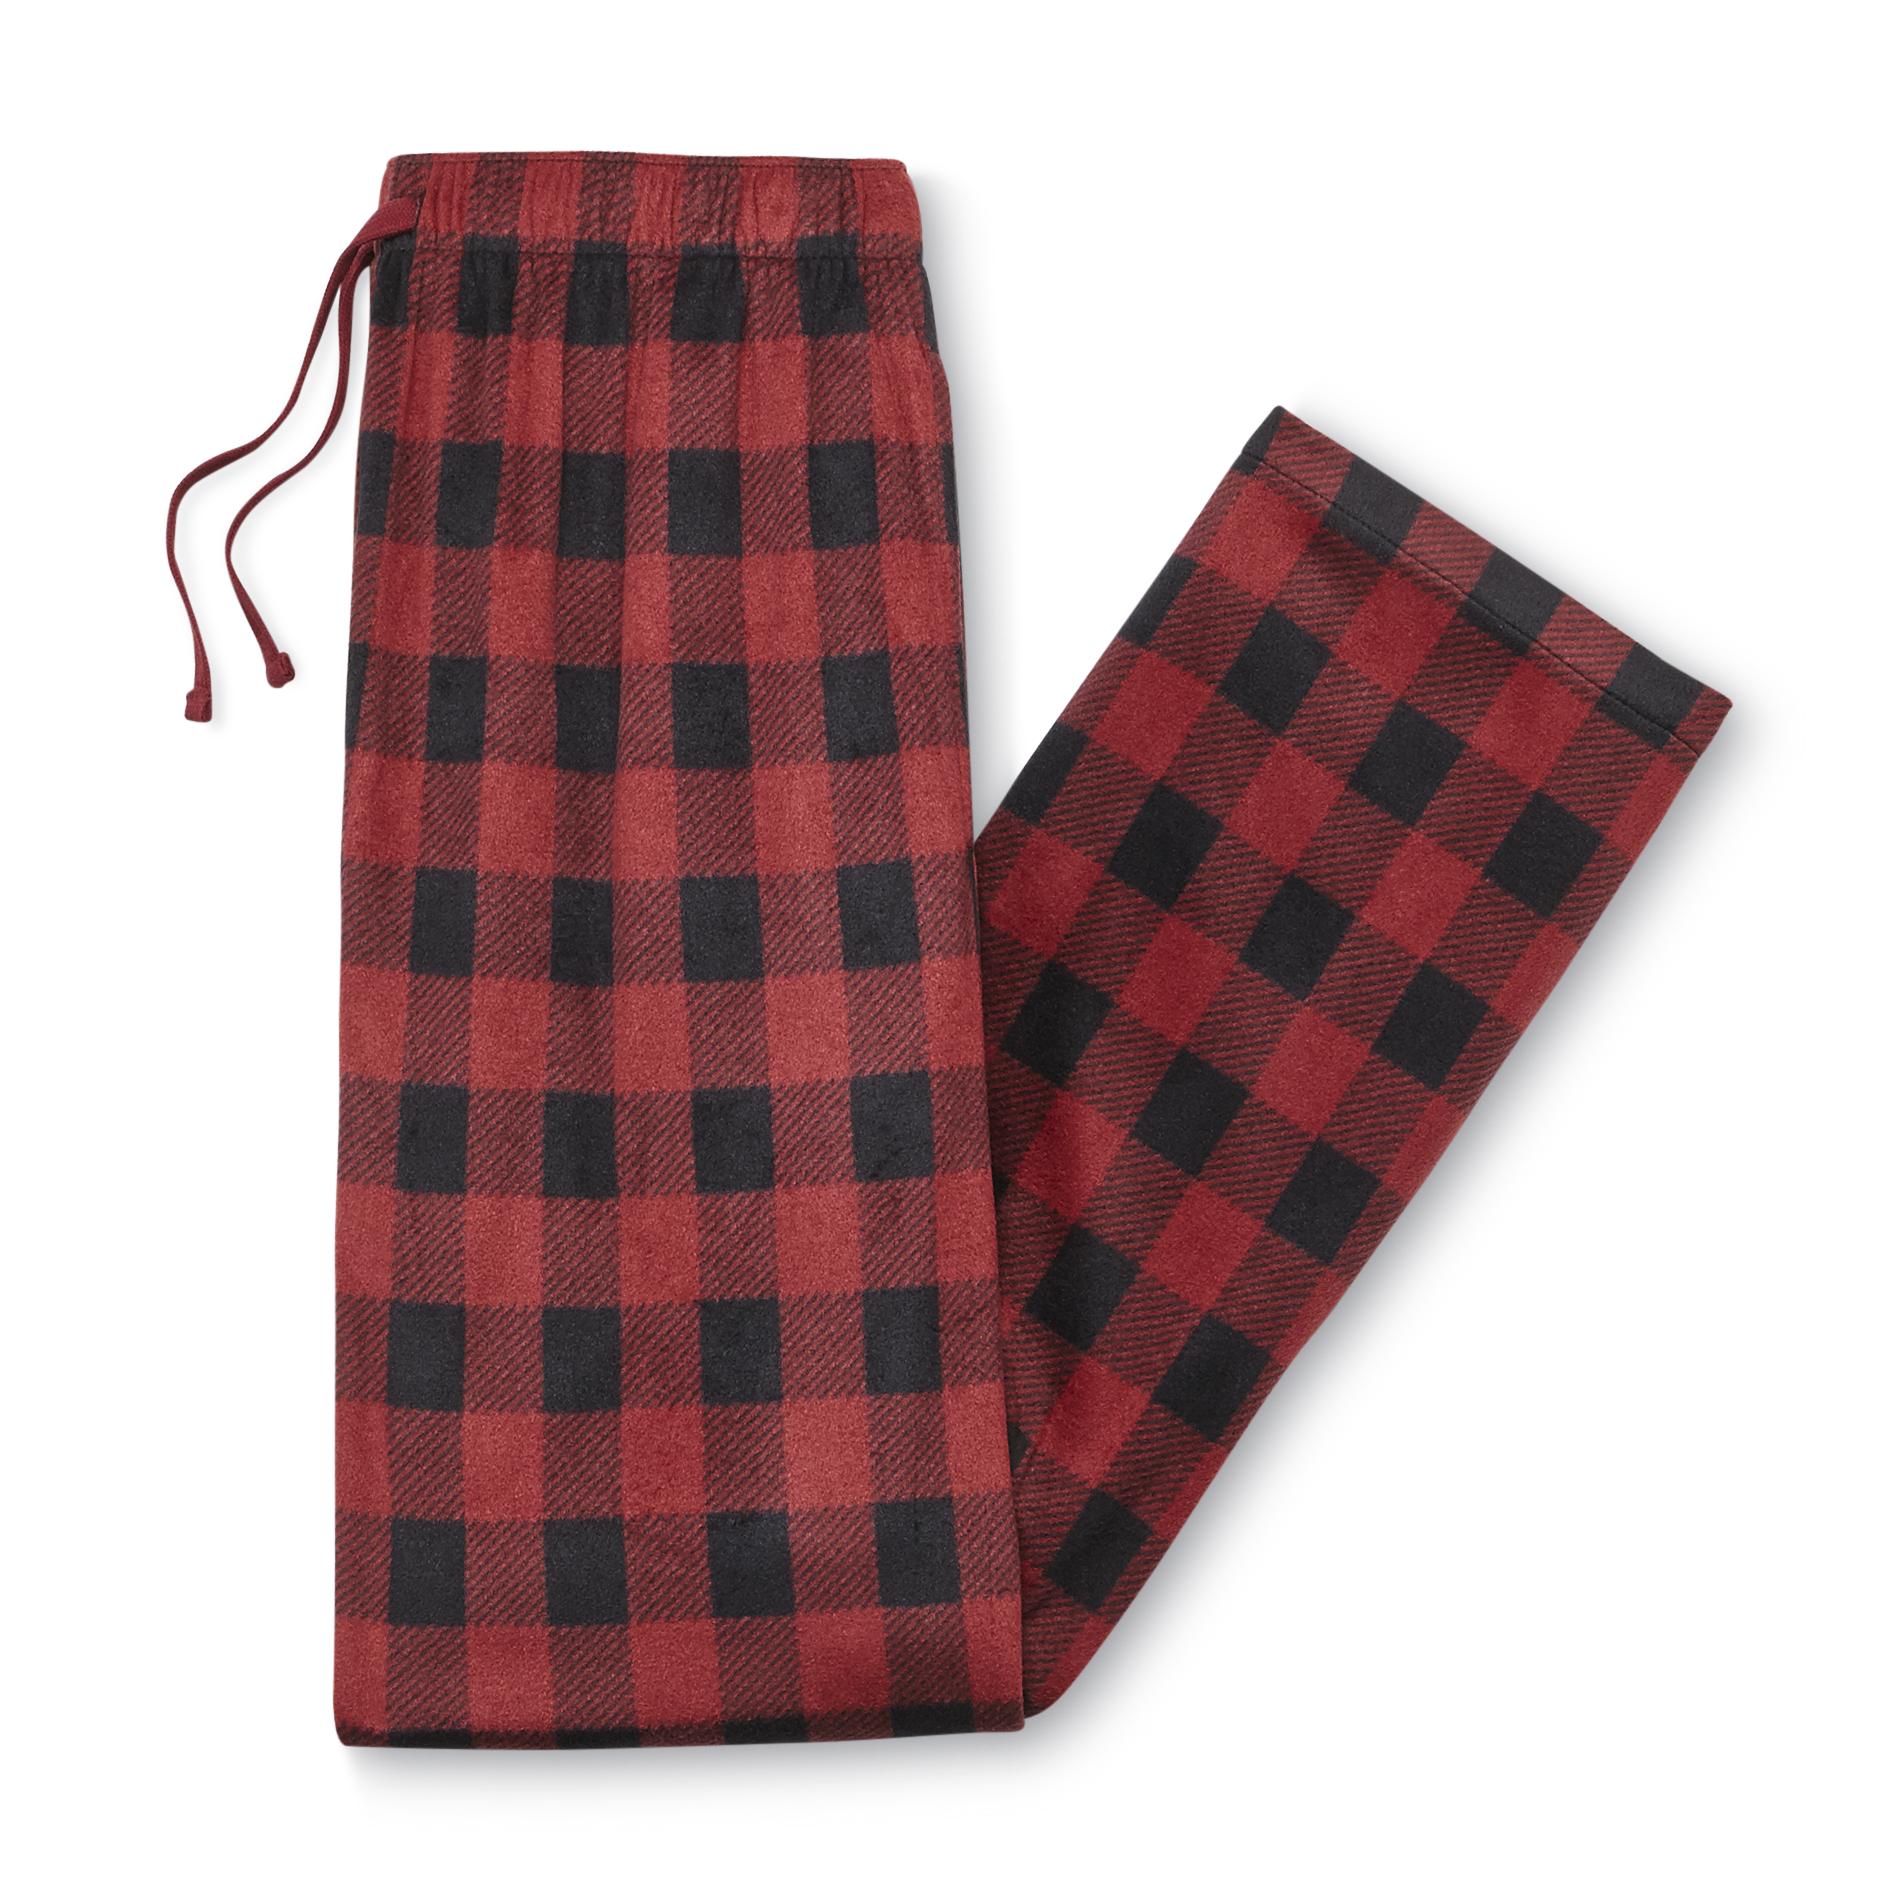 *HOT* Men’s Fleece and Flannel Pajama Pants Only $4.99 From Sears!